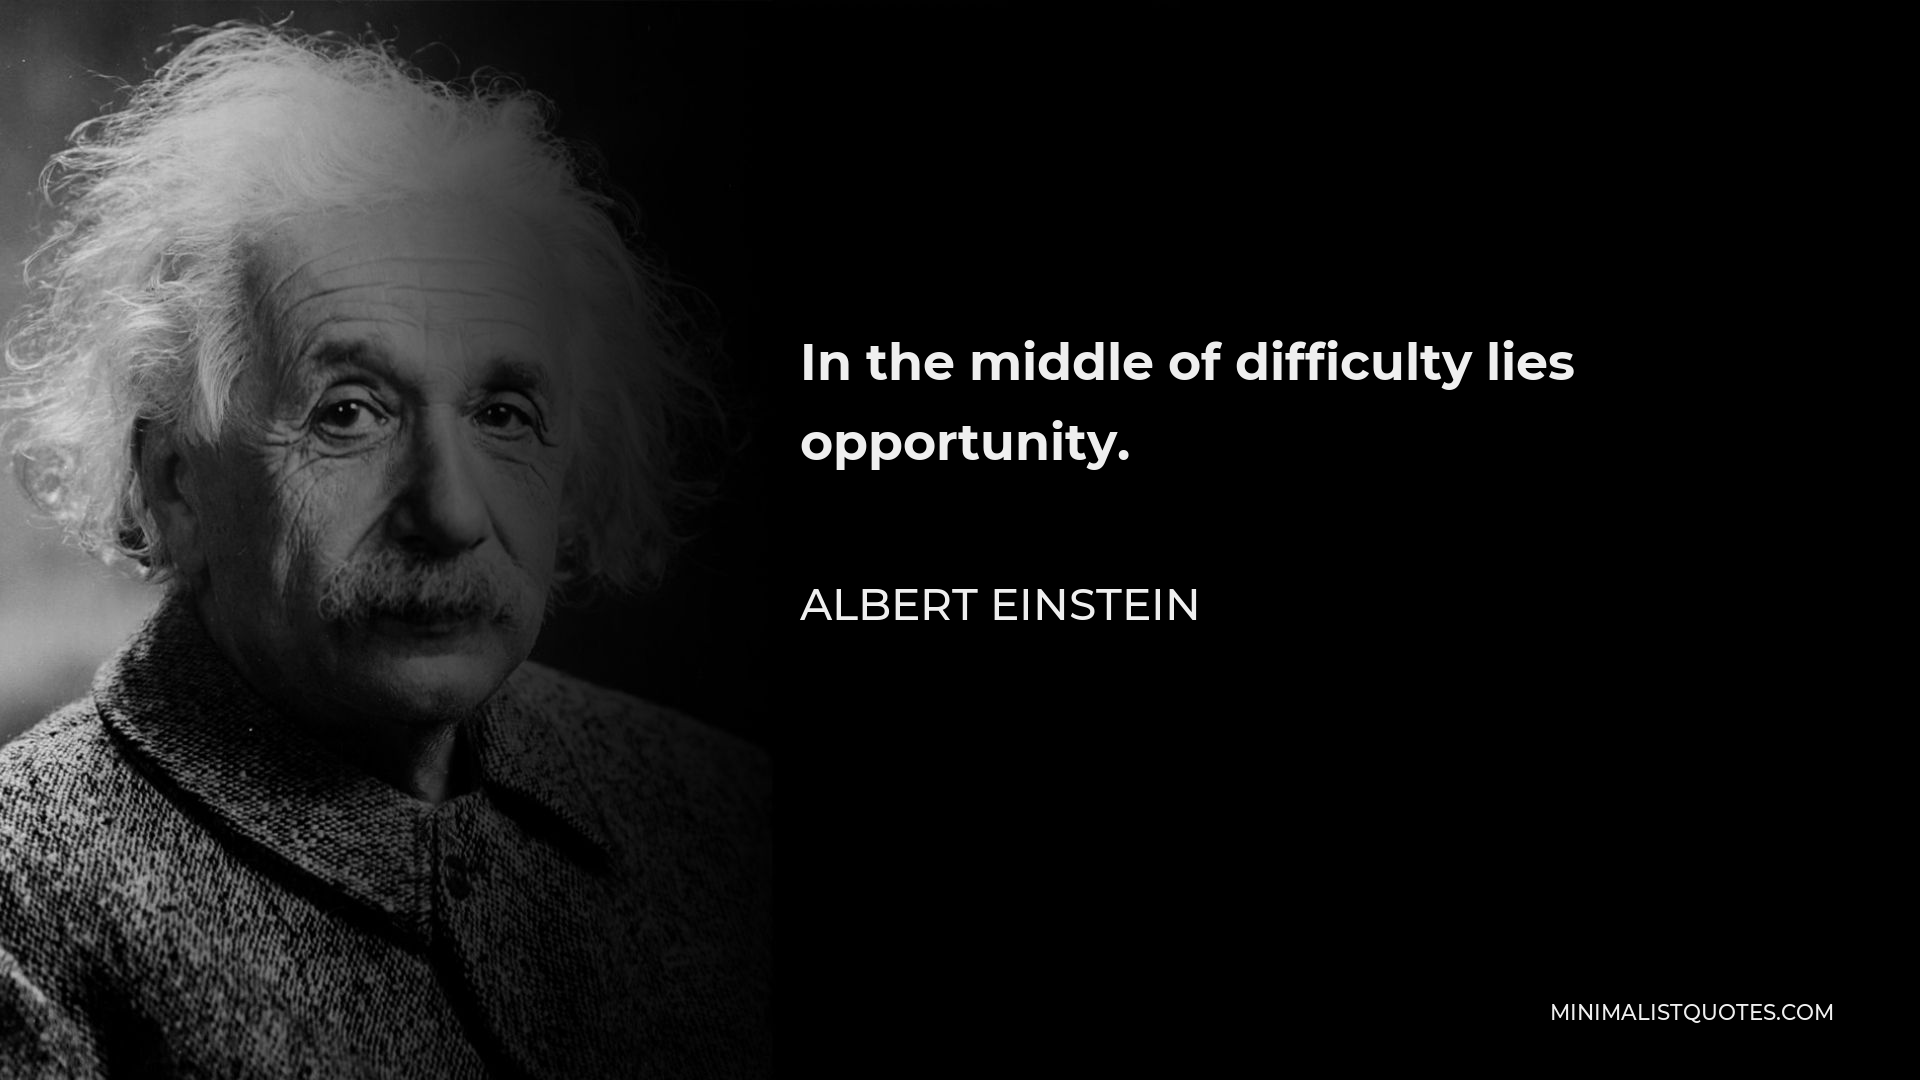 Albert Einstein Quote - In the middle of difficulty lies opportunity.